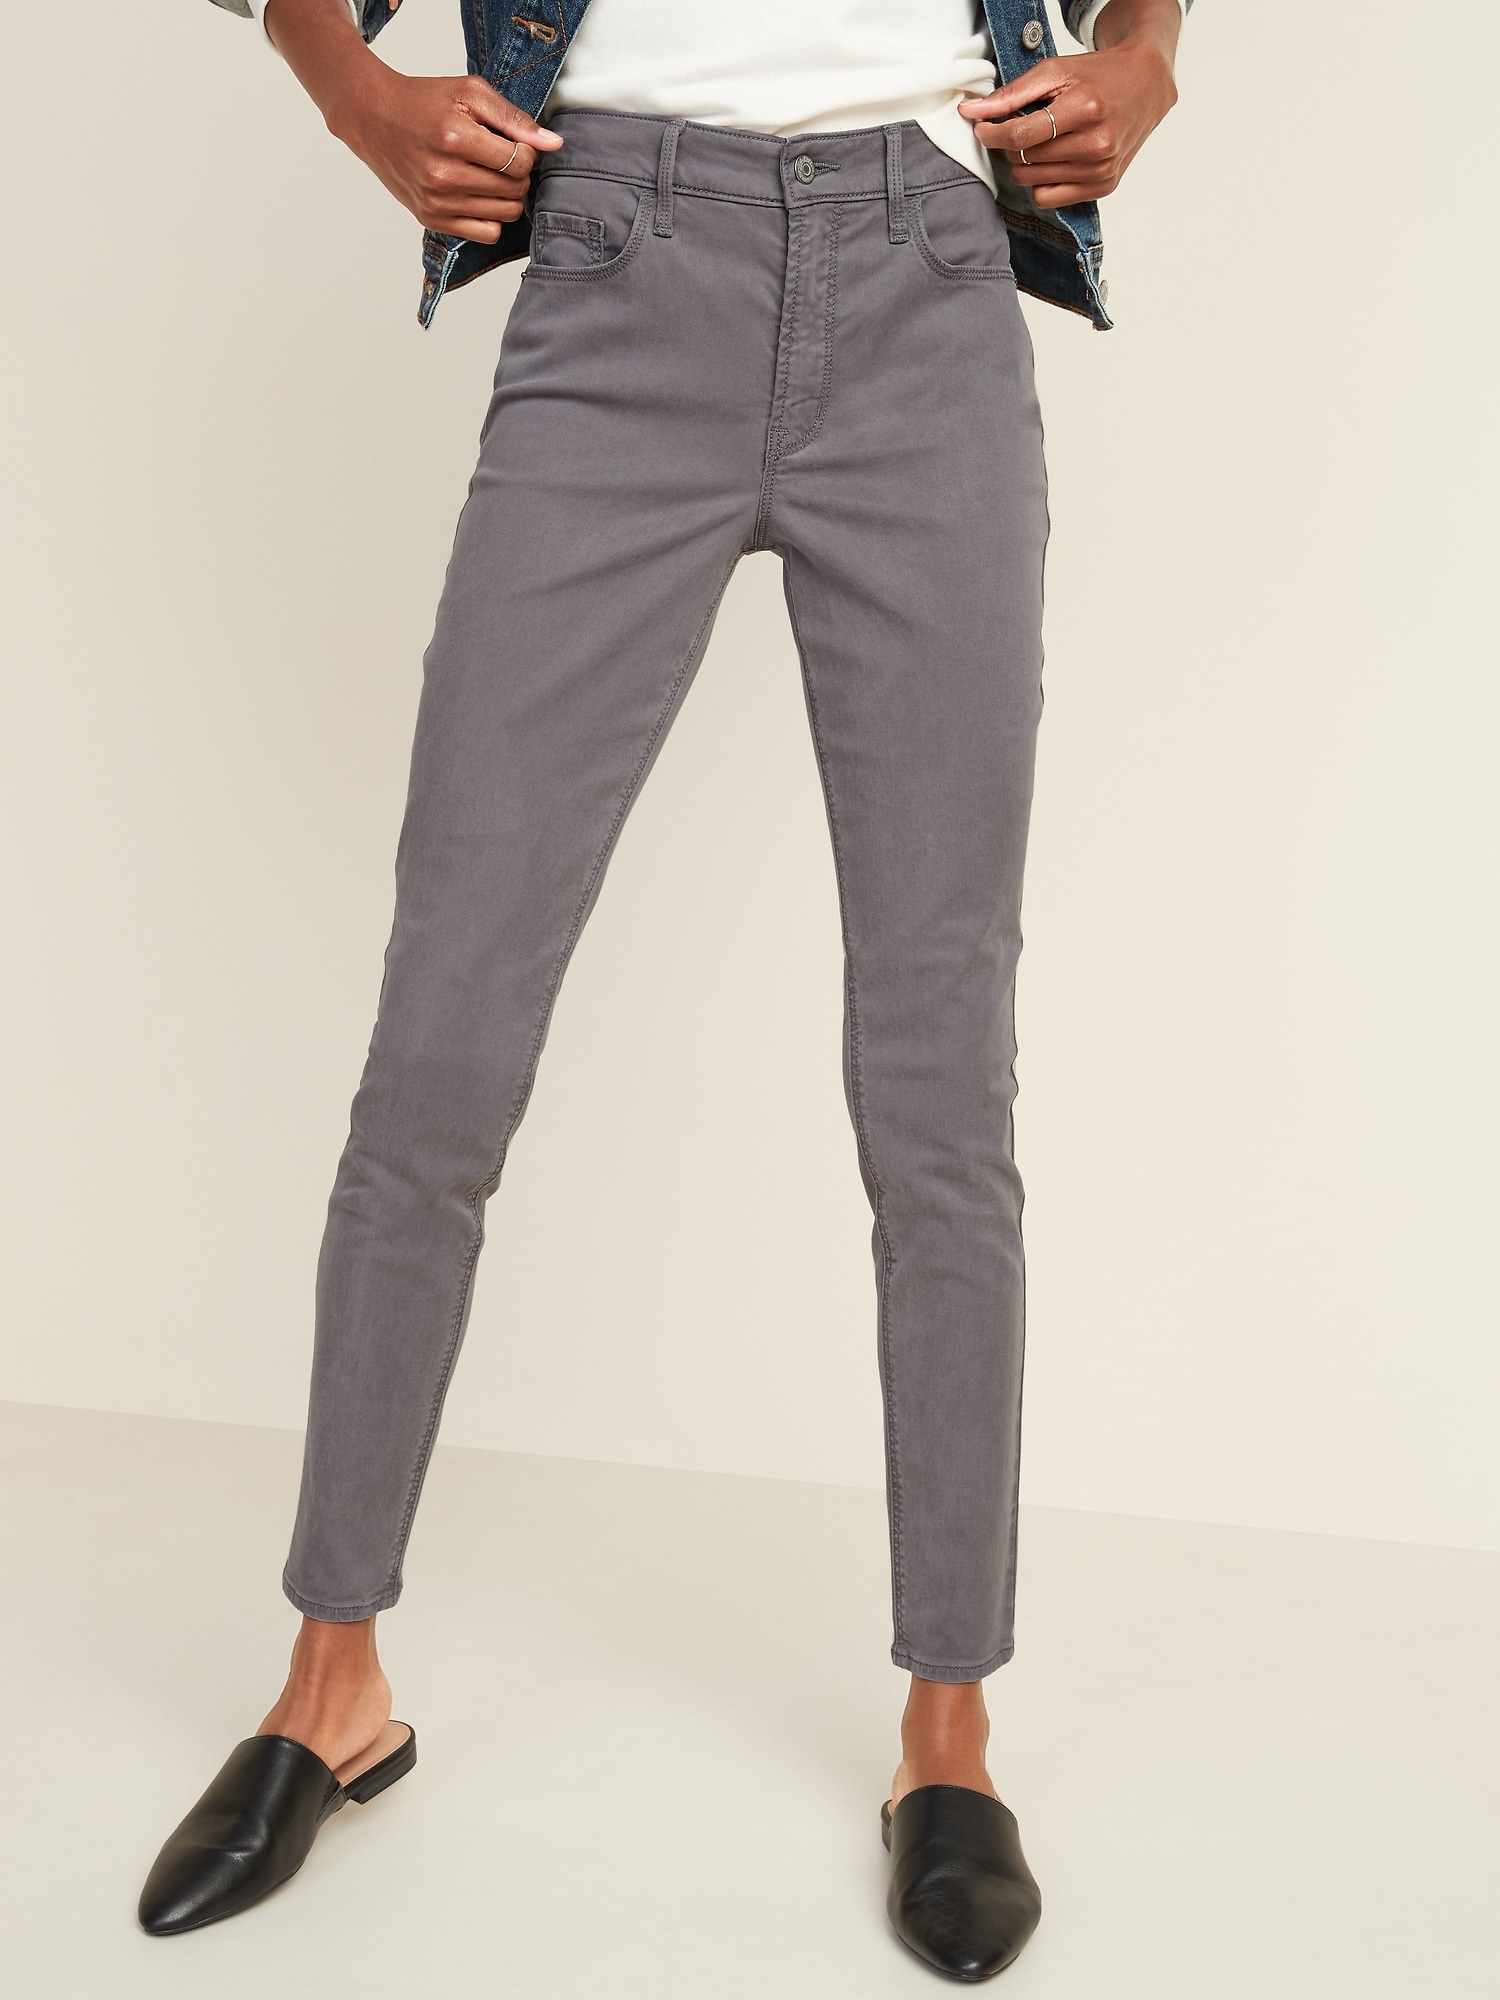 grey high waisted jeans womens